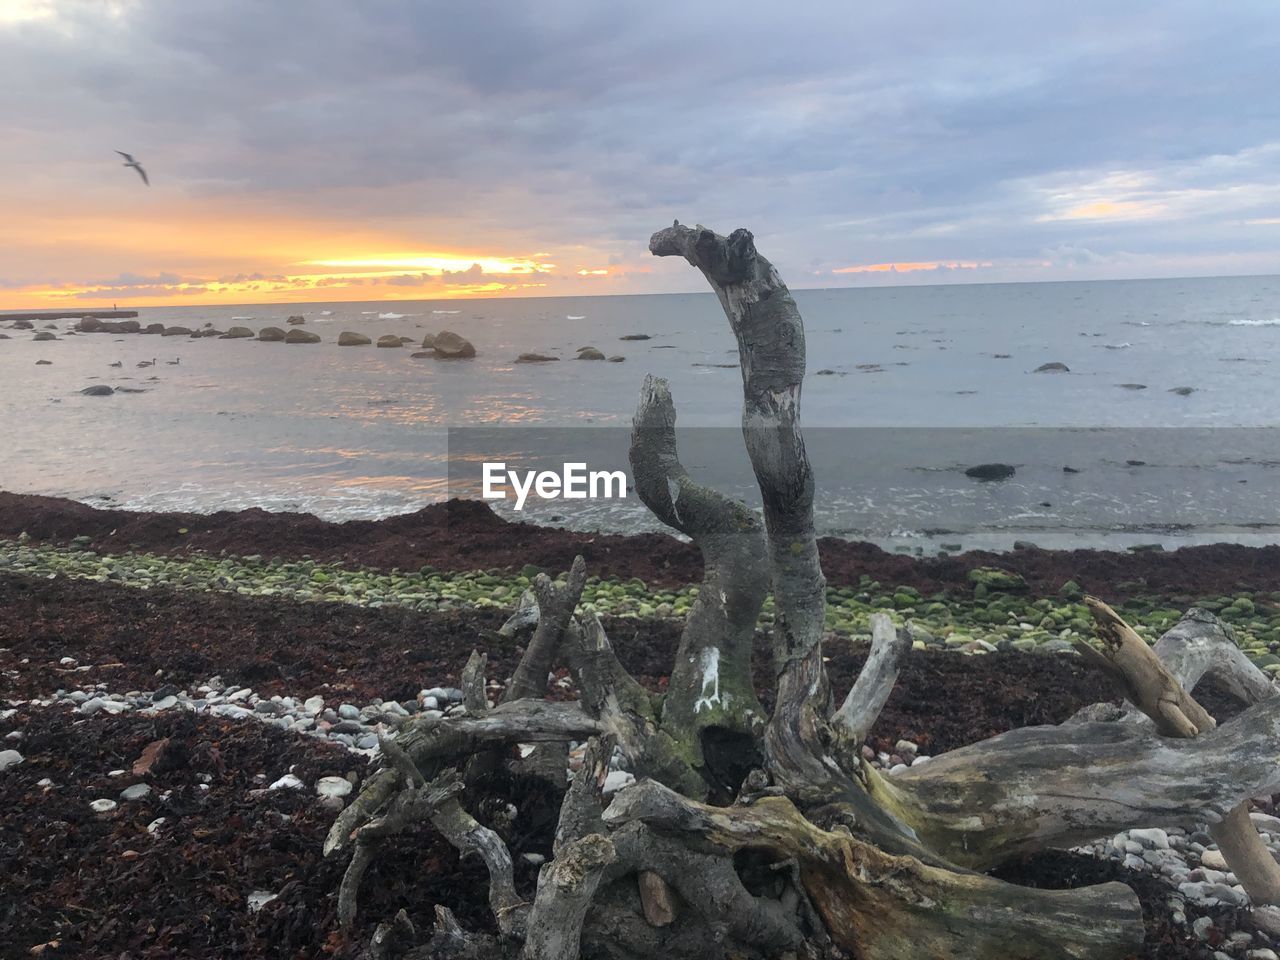 SCENIC VIEW OF DRIFTWOOD ON BEACH AGAINST SKY